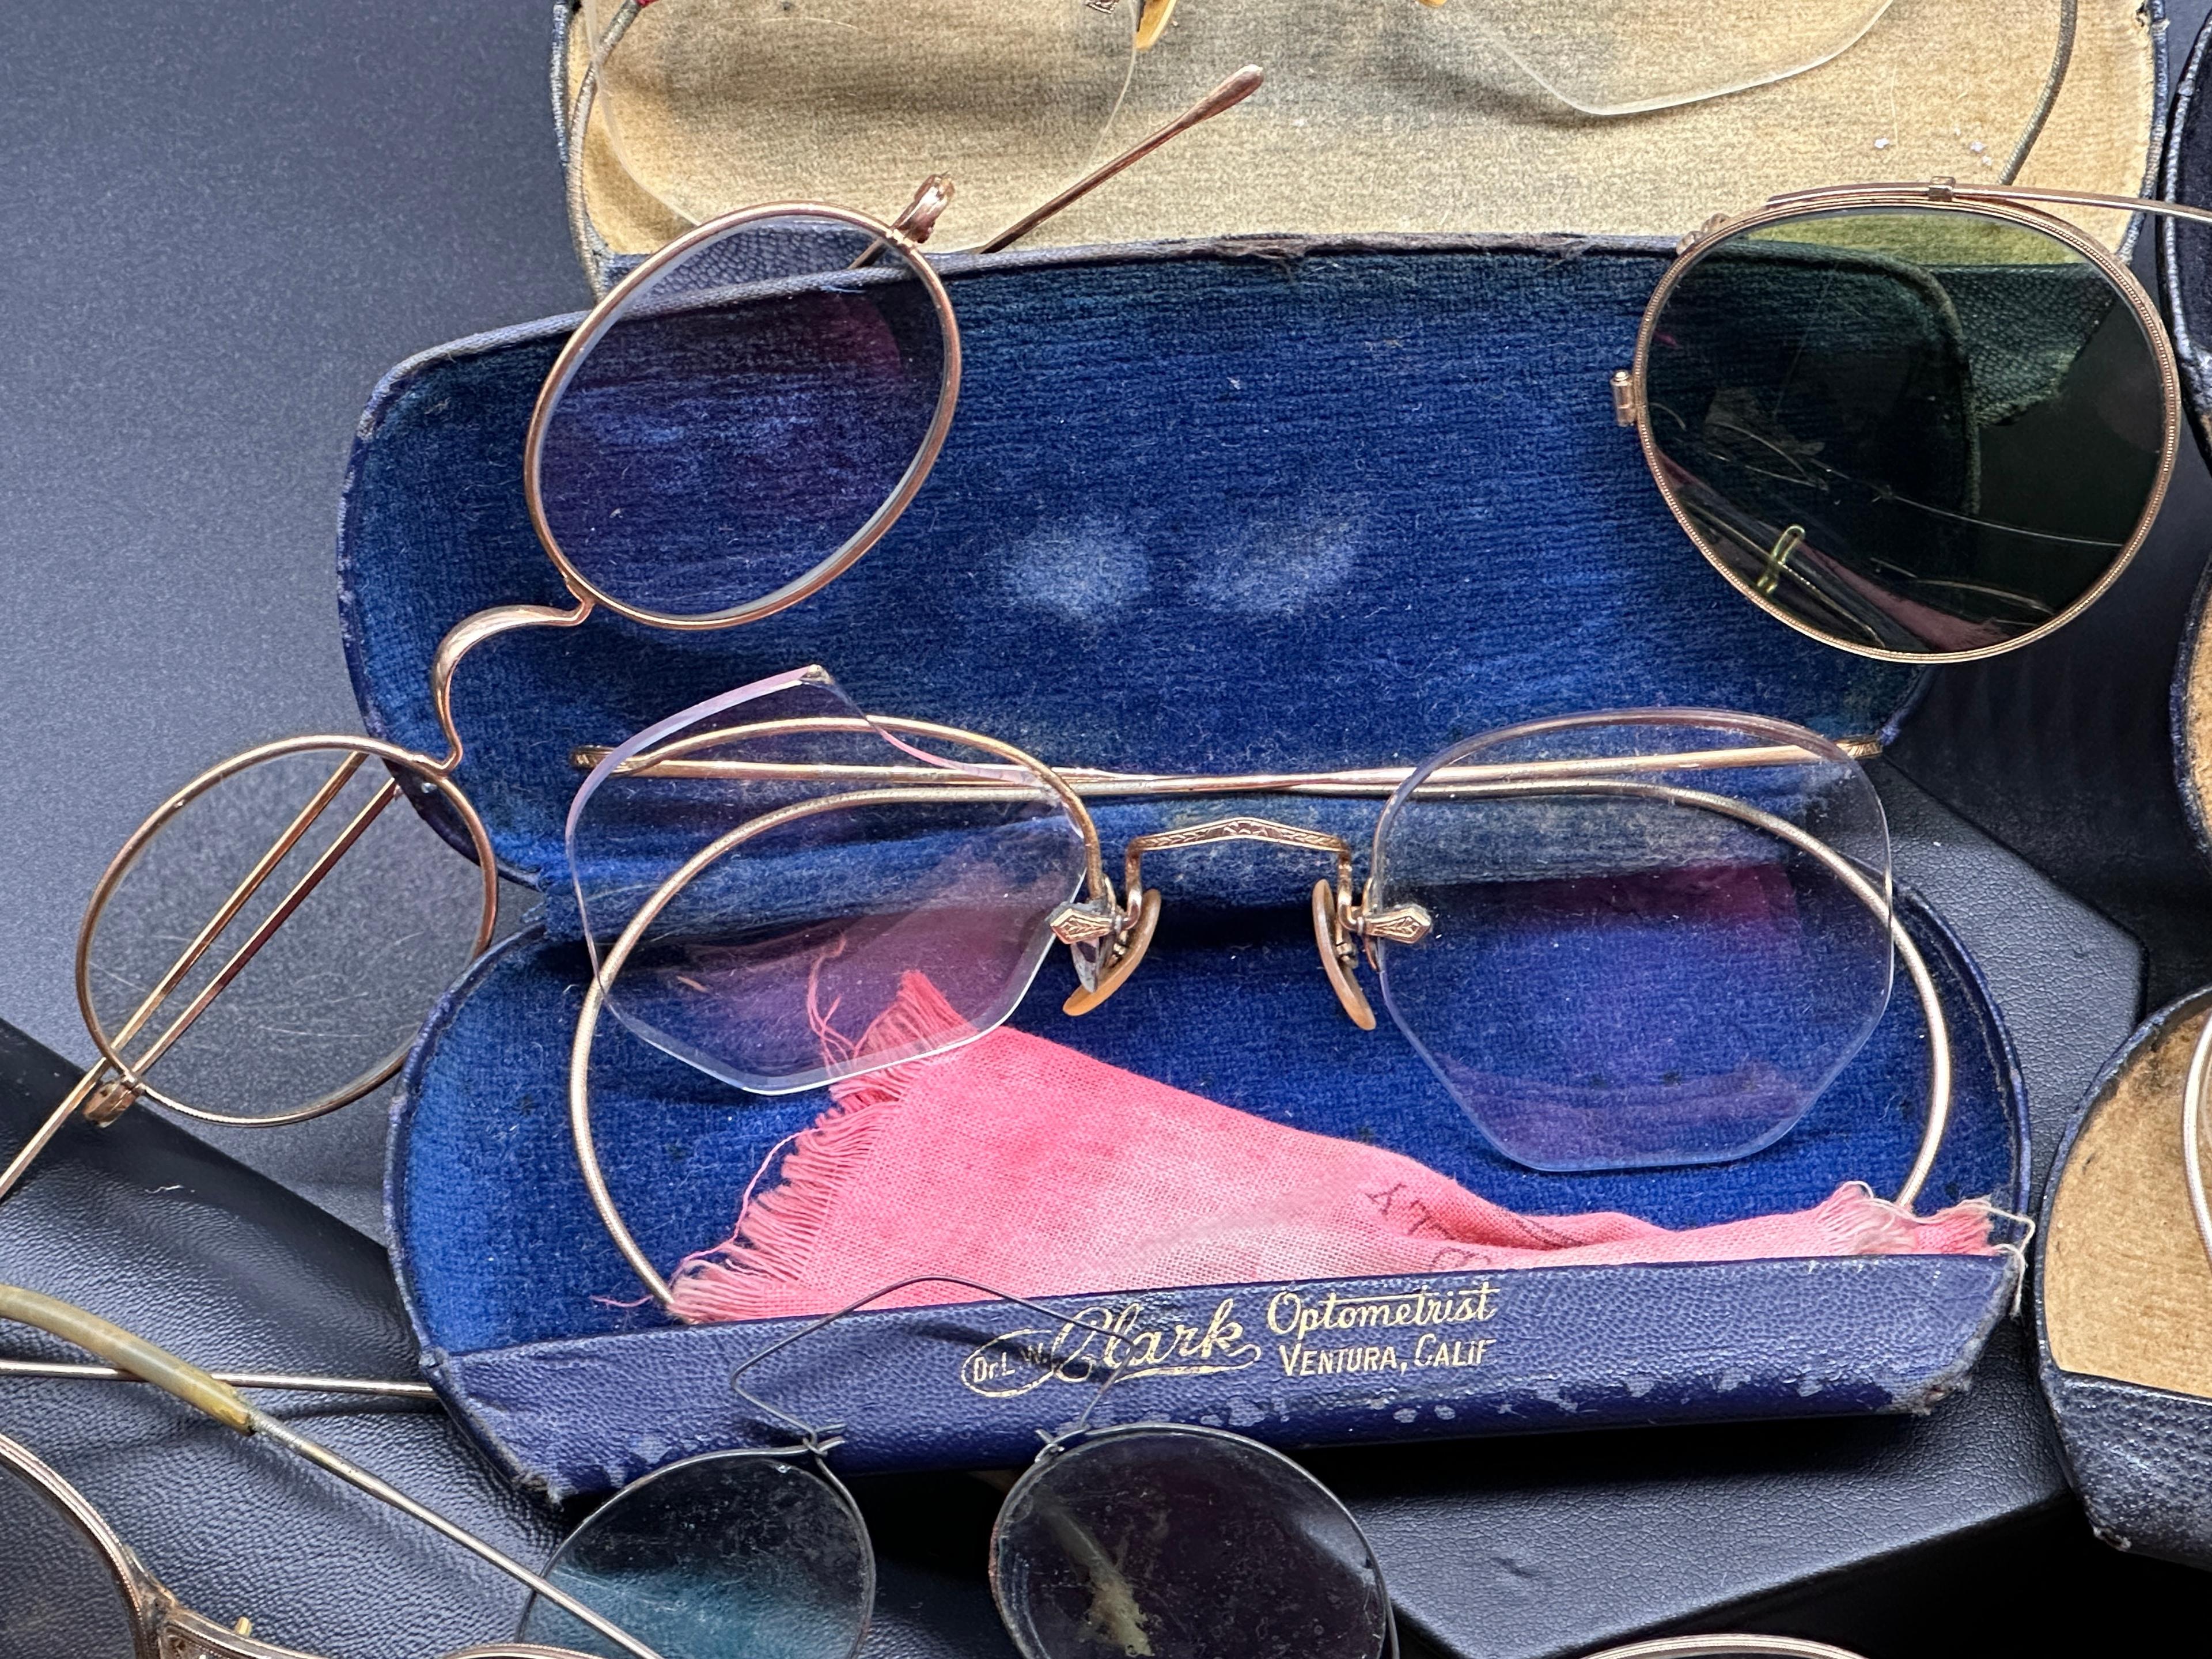 Misc. Vintage/Antique Eye Glasses and Sunglasses (Some w/Cases)